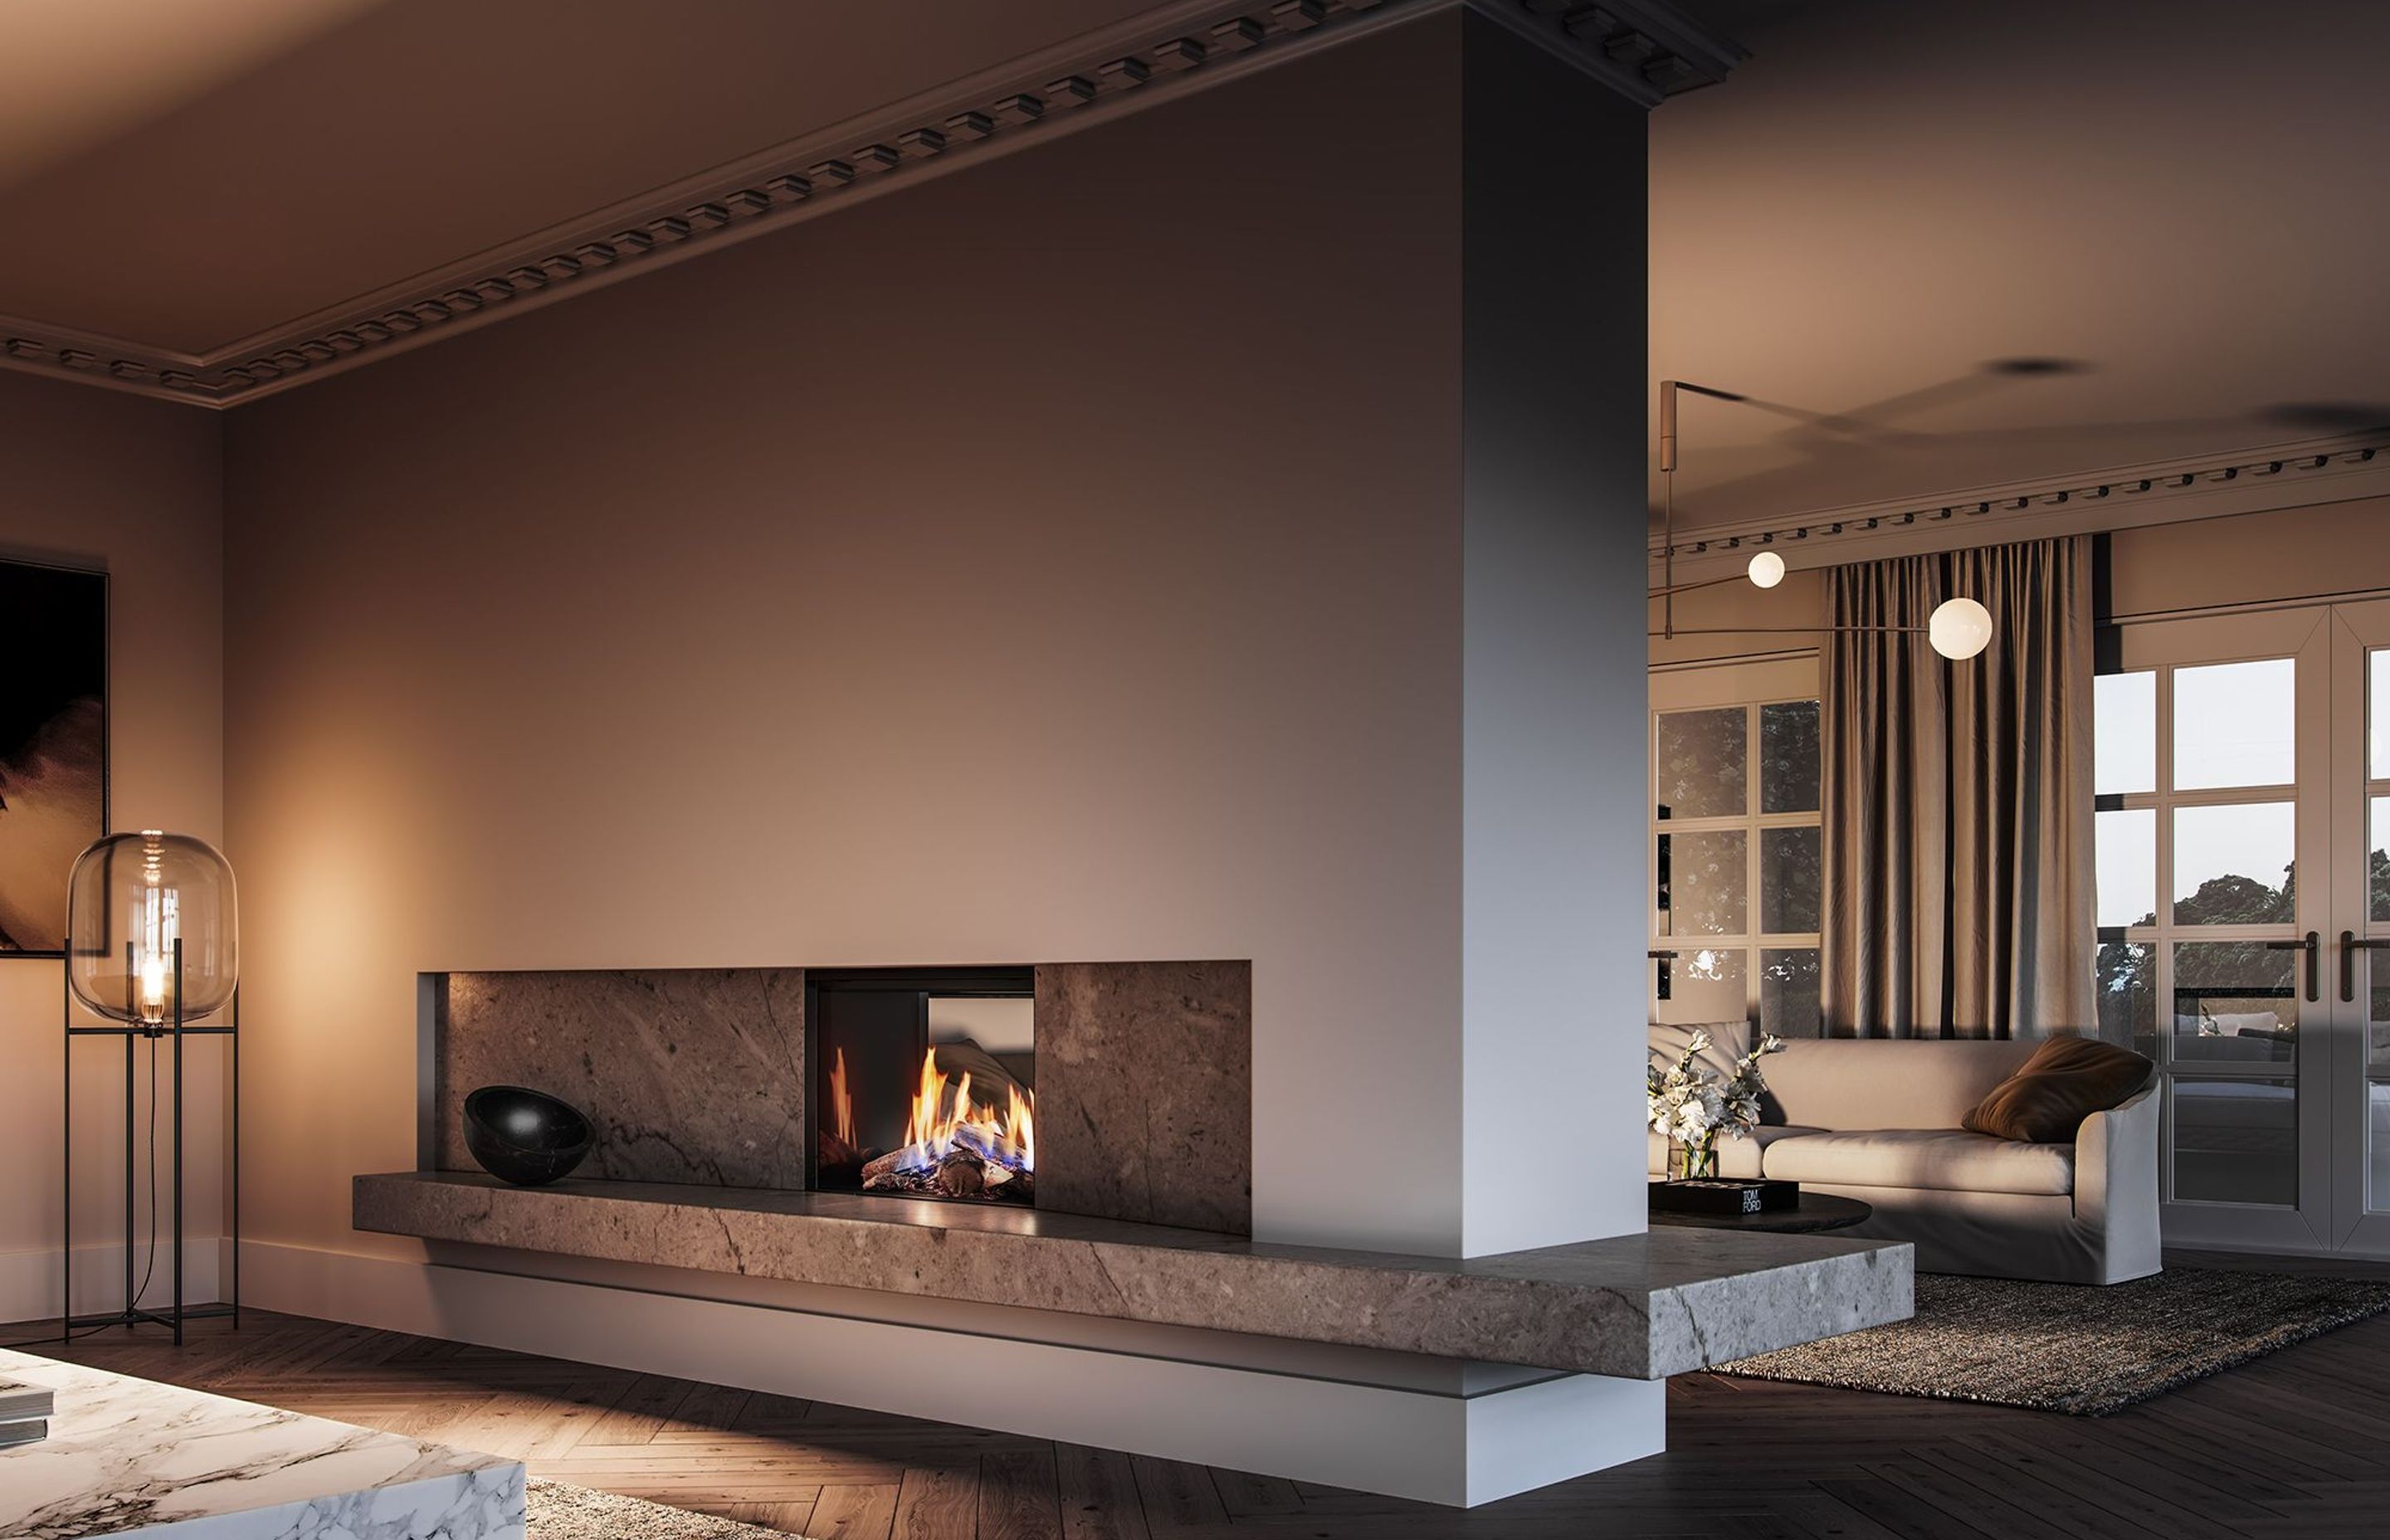 The Linear 800 fireplace with FlameTech.